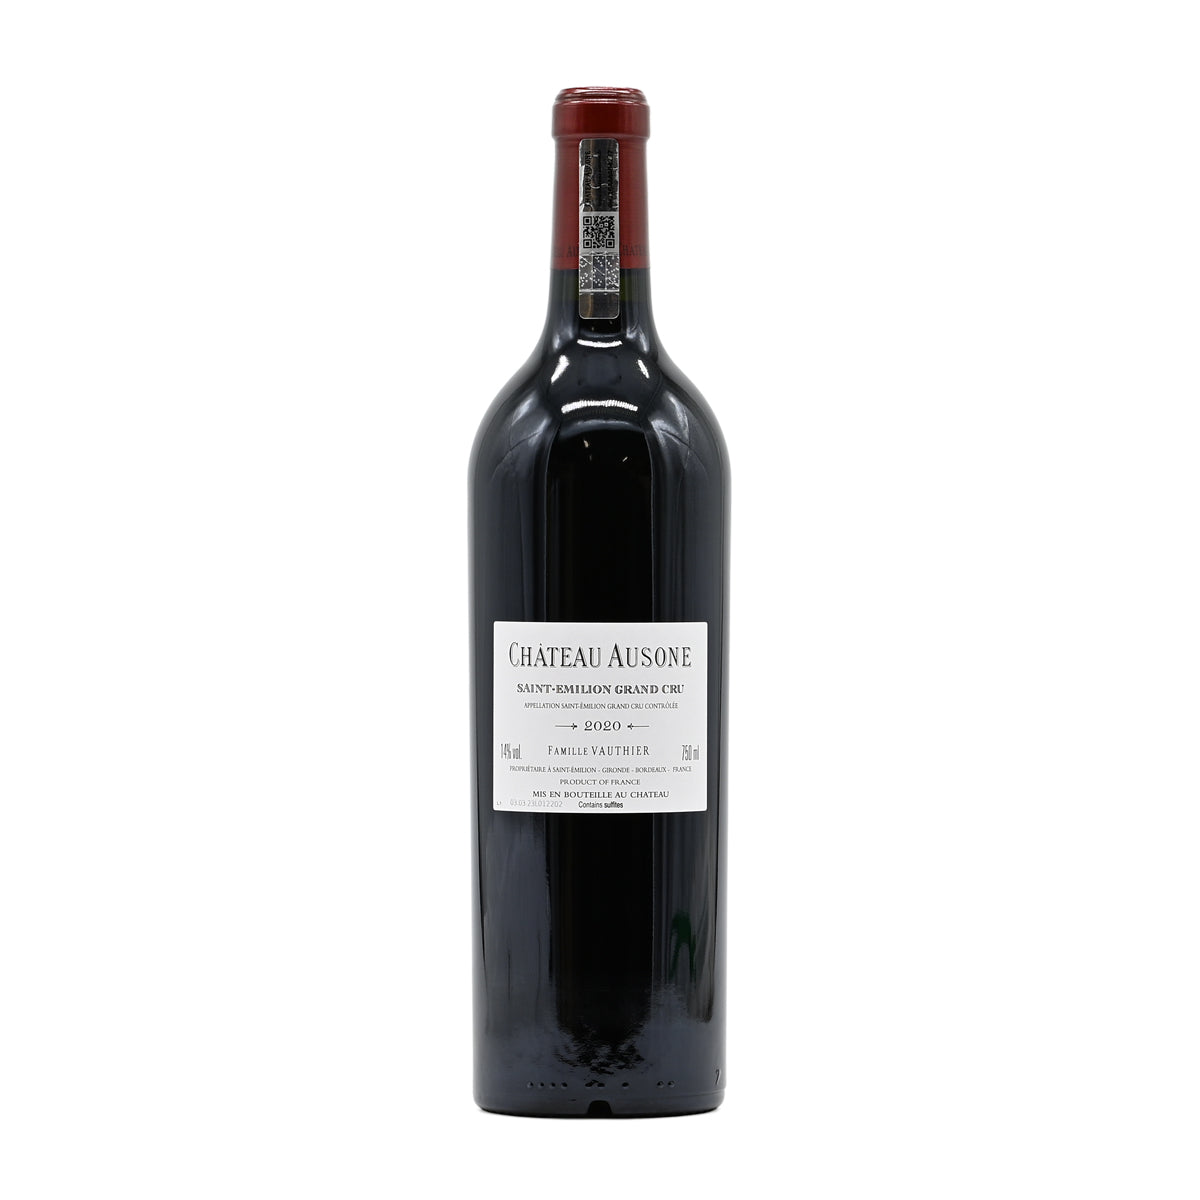 Château Ausone 2020, 750ml French red wine; made of a blend of Merlot and Cabernet Franc; from Saint-Emilion Grand Cru, Bordeaux, France – GDV Fine Wines, Hong Kong